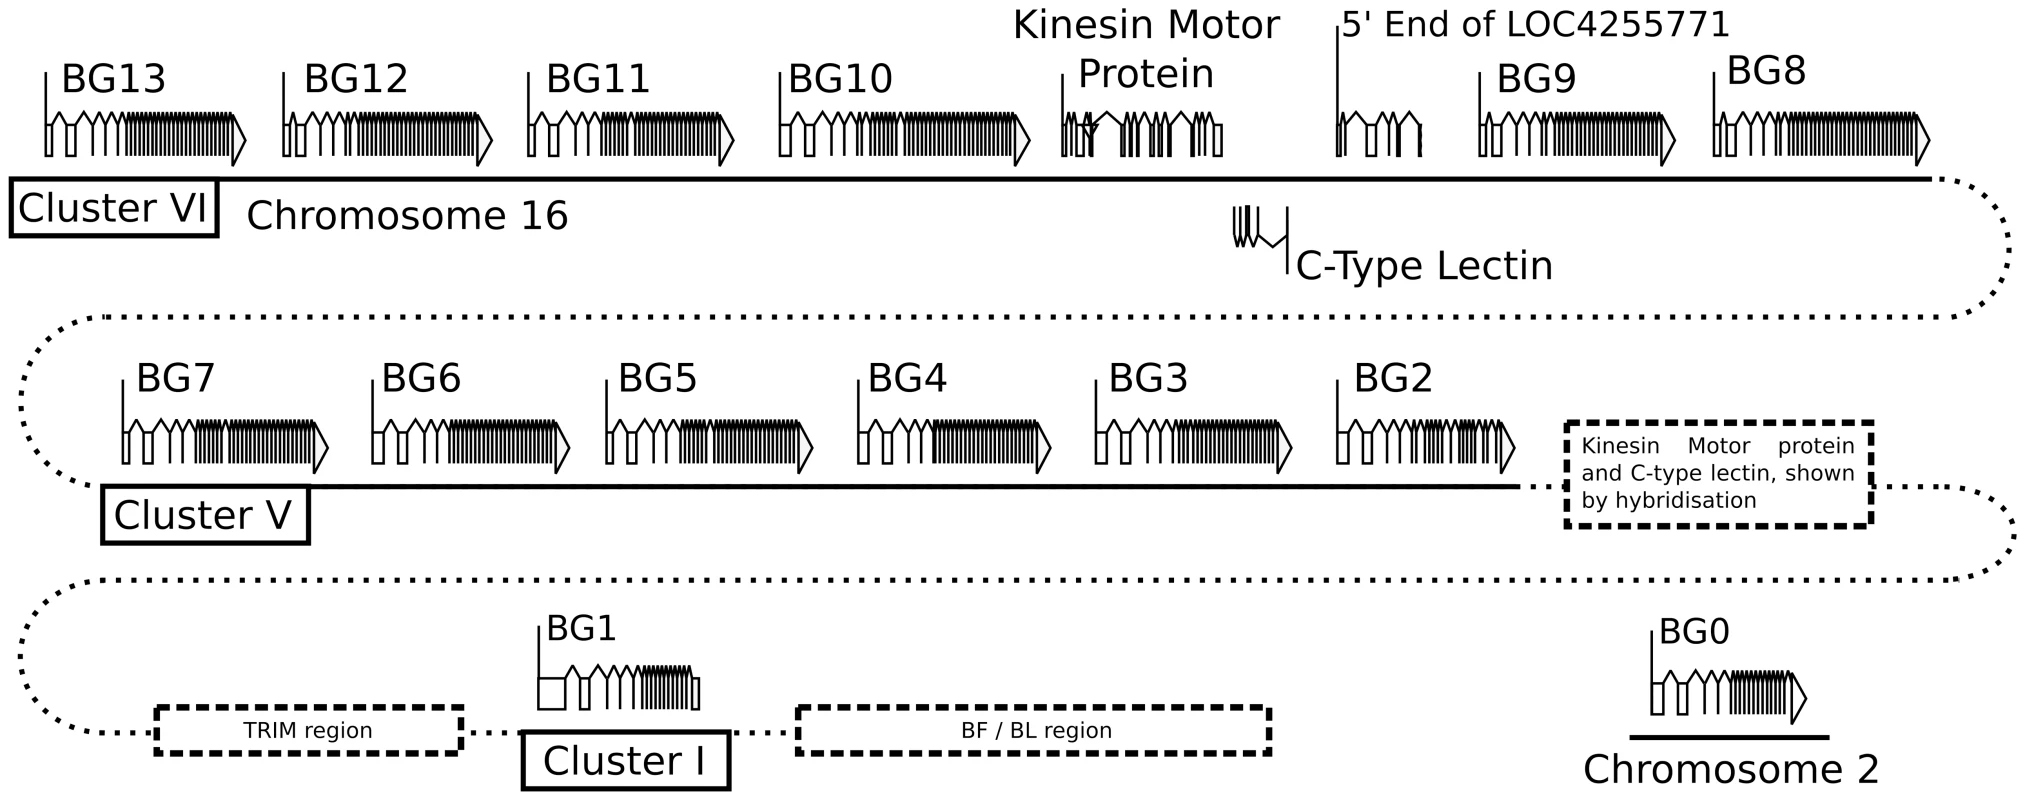 Fourteen BG genes of the B12 haplotype are present as two singletons (BG0 on chromosome 2, and BG1 in the BF-BL region or classical MHC on chromosome 16) and a cluster of twelve genes in the BG region on chromosome 16 (BG2-BG13, all in the same transcriptional orientation but separated into clusters V and VI by a region containing a kinesin motor protein gene, a C-type lectin gene, and an unassigned gene called LOC4255771).